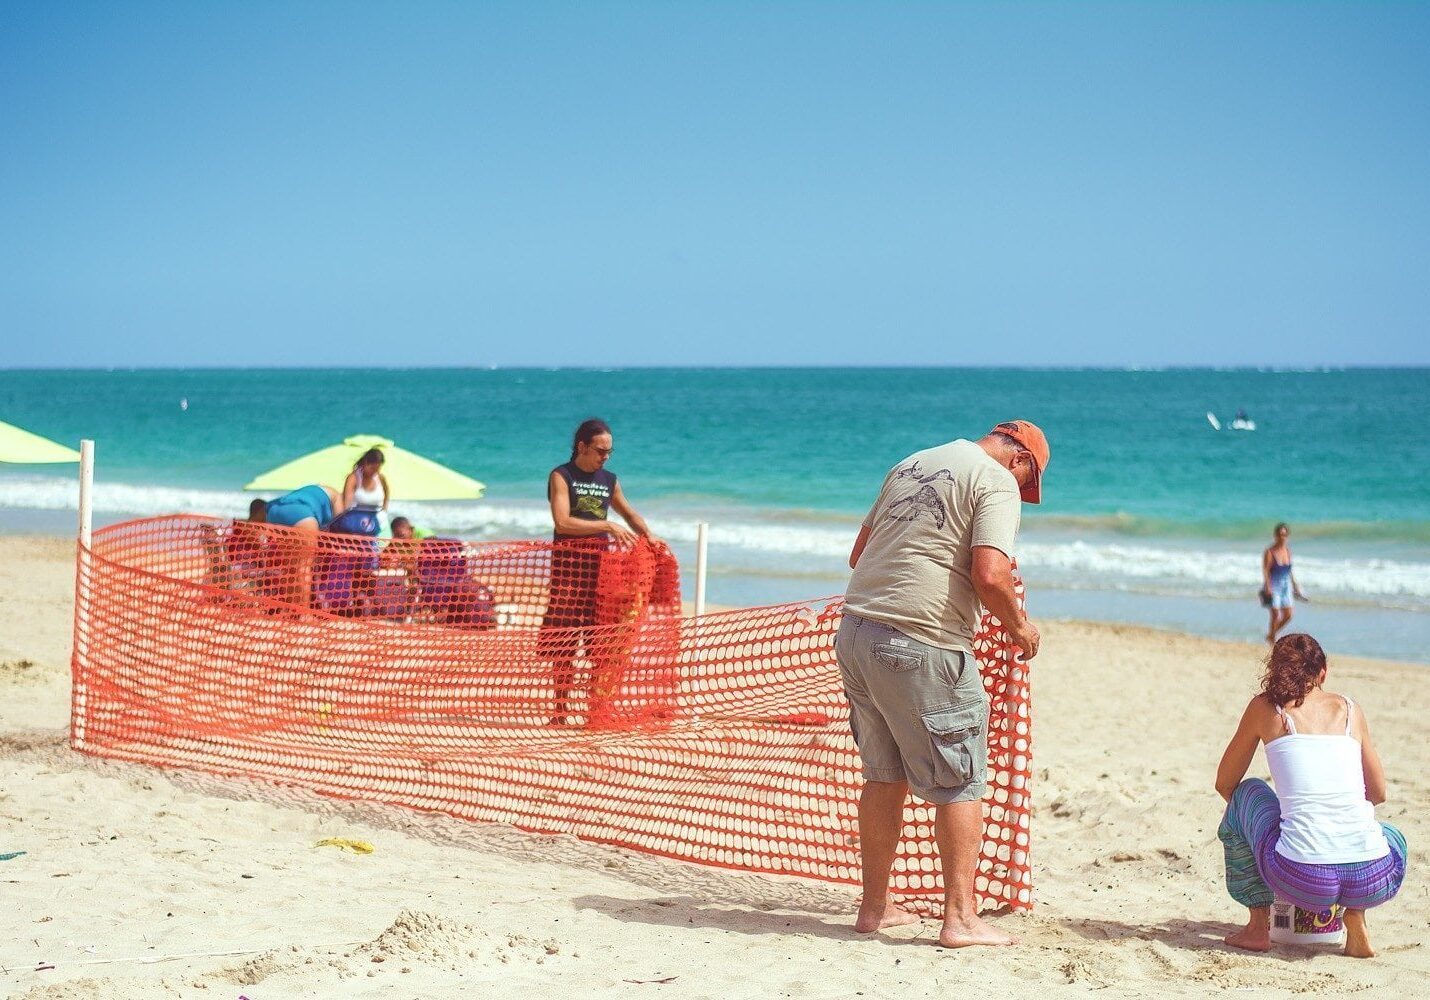 Edwin and Annette setting up a Fence to Protect a Sea Turtle Nest.